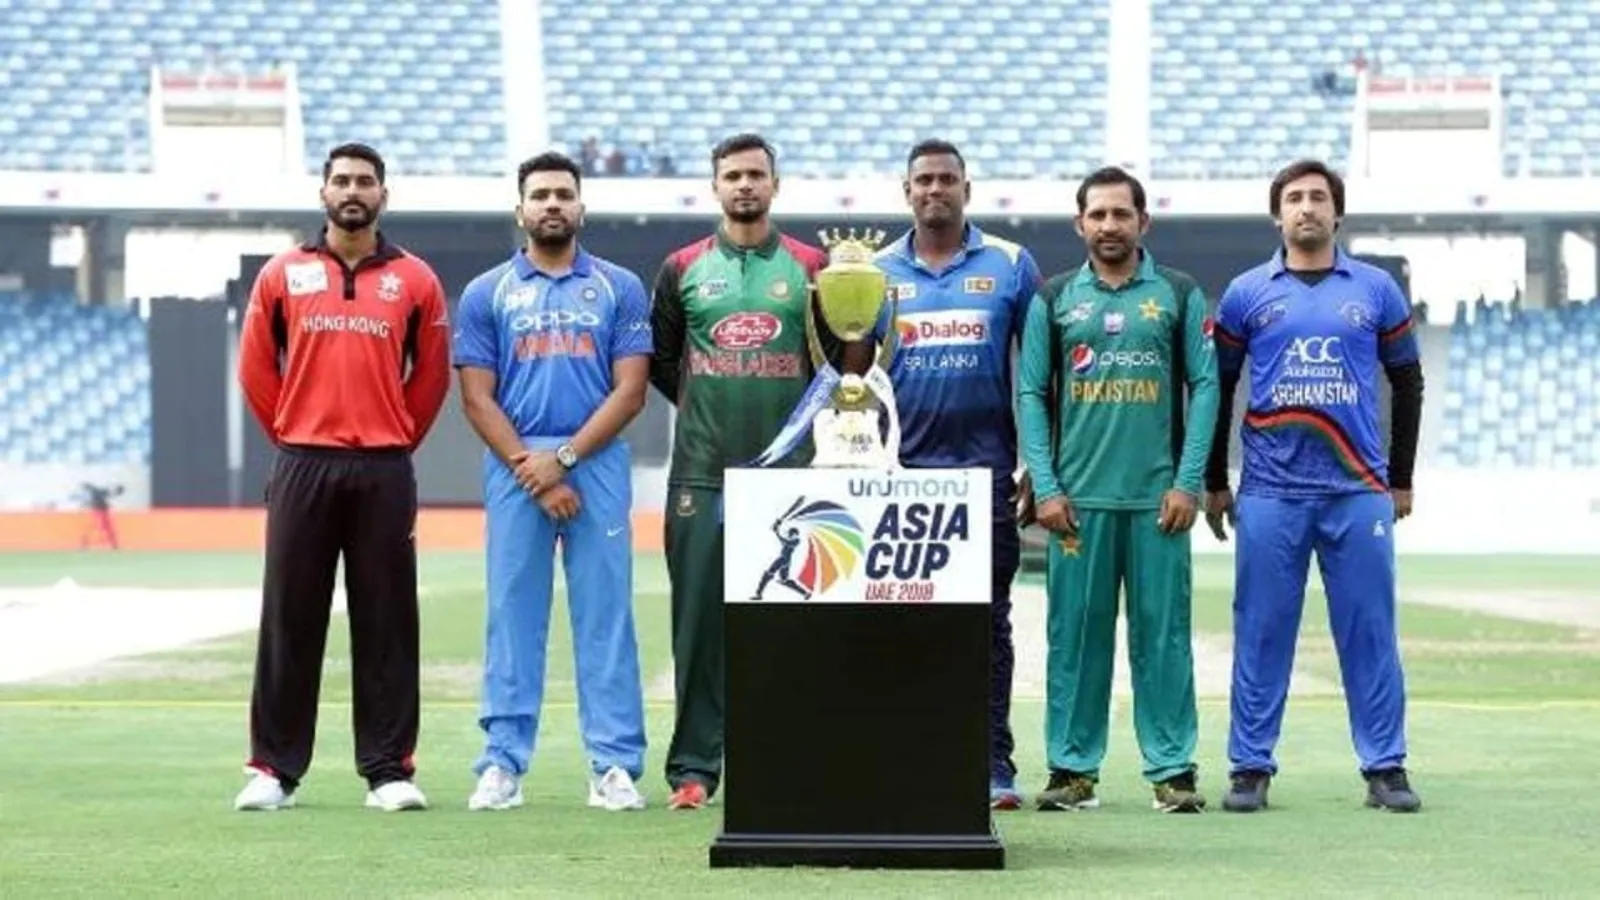 Dates for the 2022 Asia Cup, Teams, Squads, Qualifications, Players